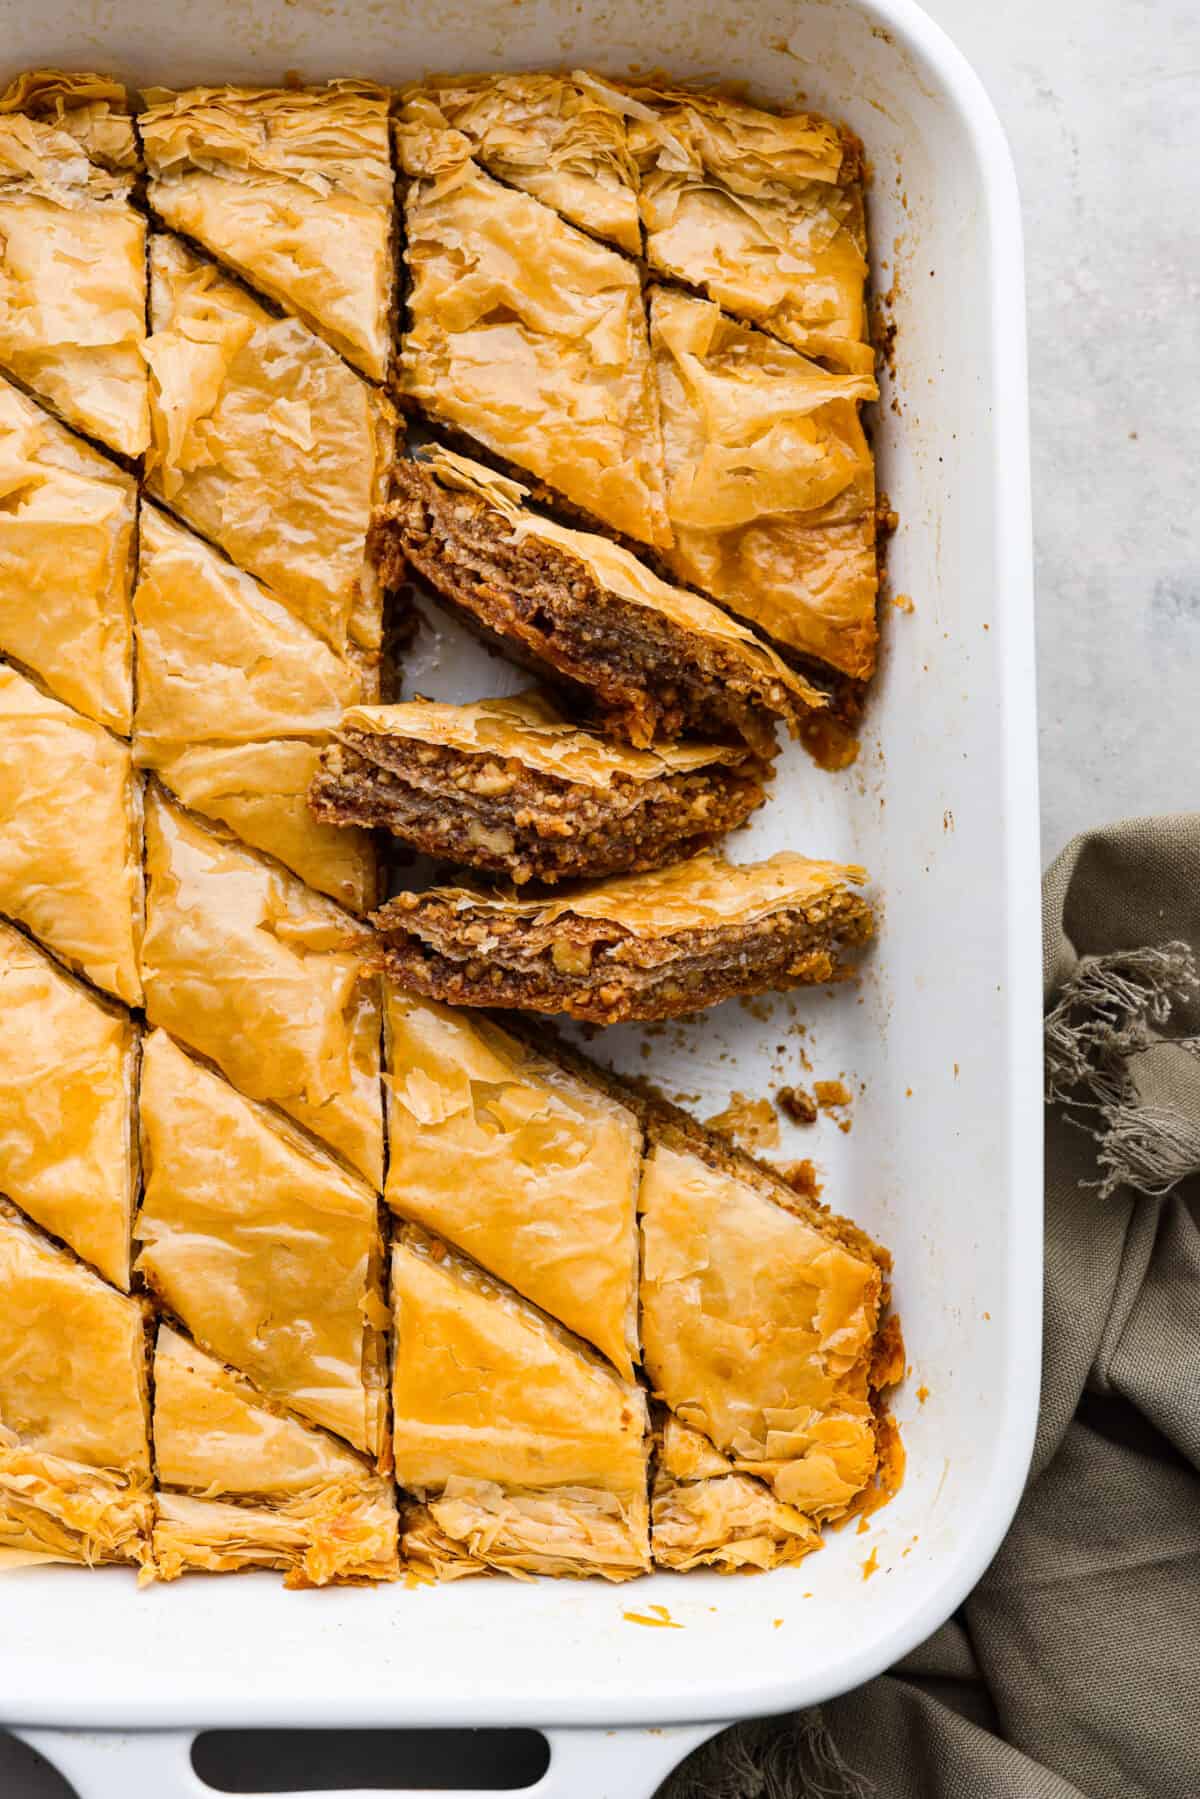 Baklava in a baking dish, cut into slices.